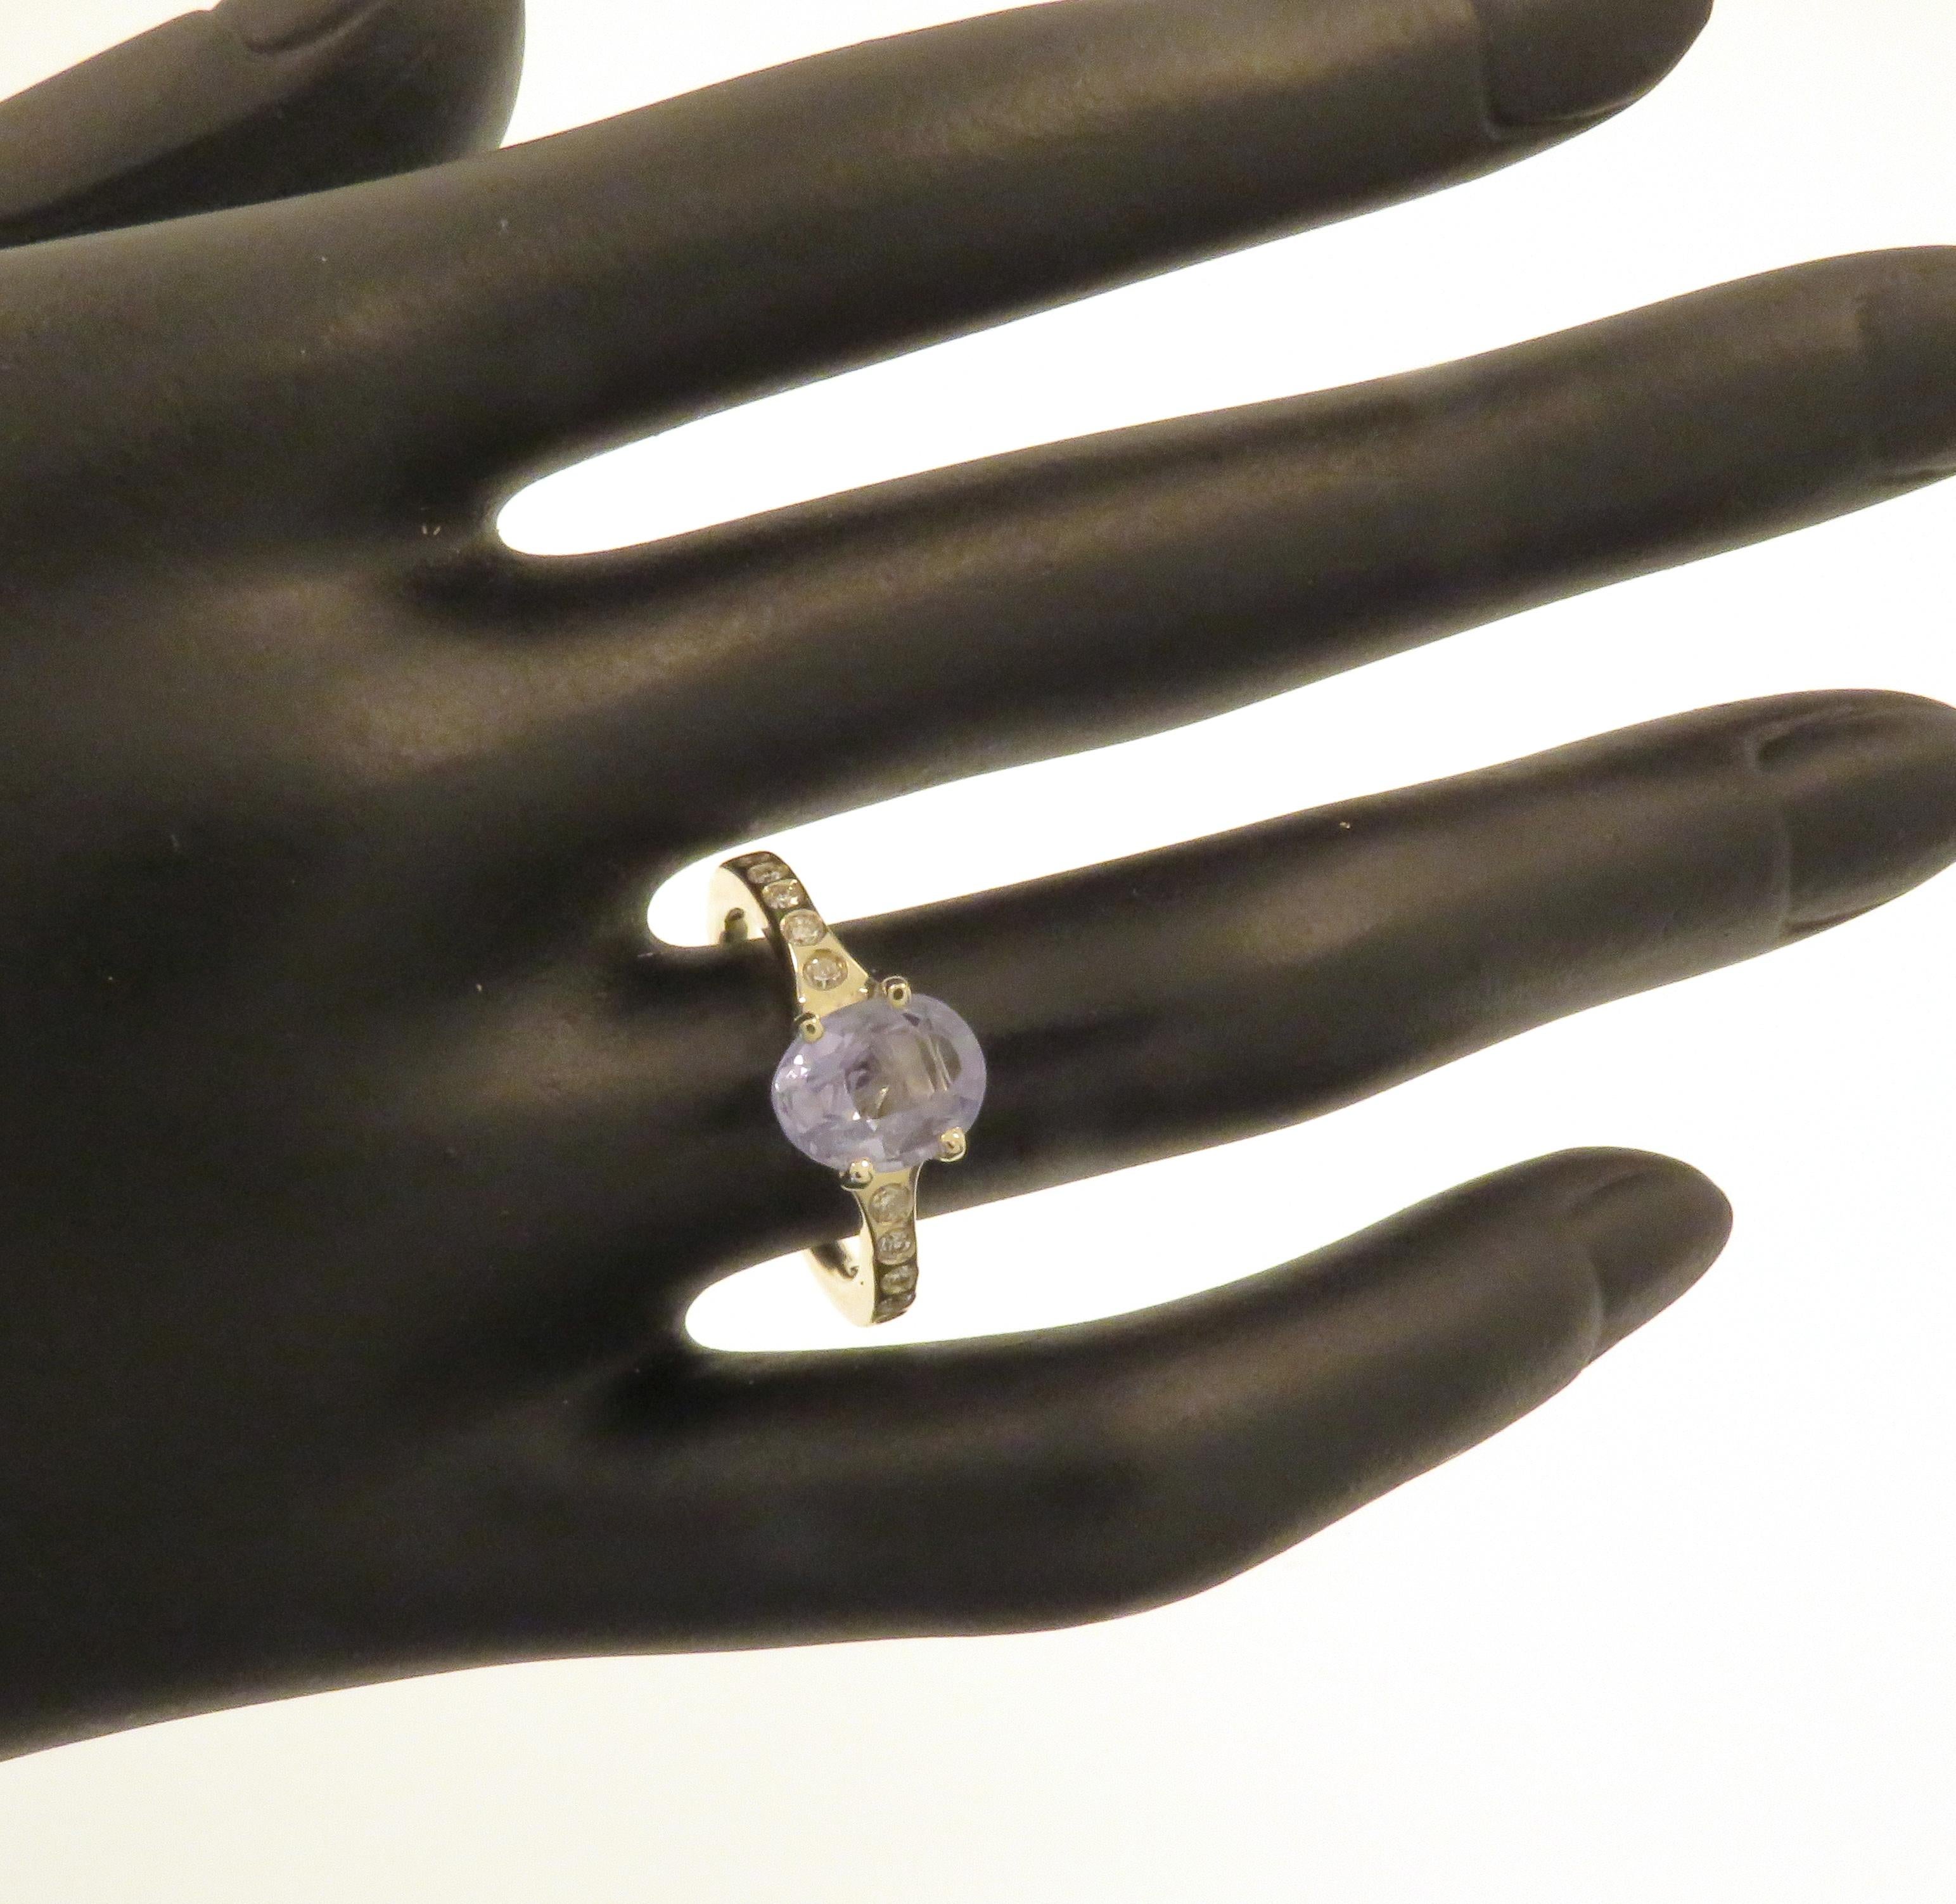 Stunning solitaire ring featuring a natural delicate blue sapphire oval cut and 10 diamonds on the ring shoulders. Handmade in 9k white gold. Marked with the Italian gold mark 375 and Botta Gioielli brandmark 716MI.

Handcrafted in: 9k white gold.
1